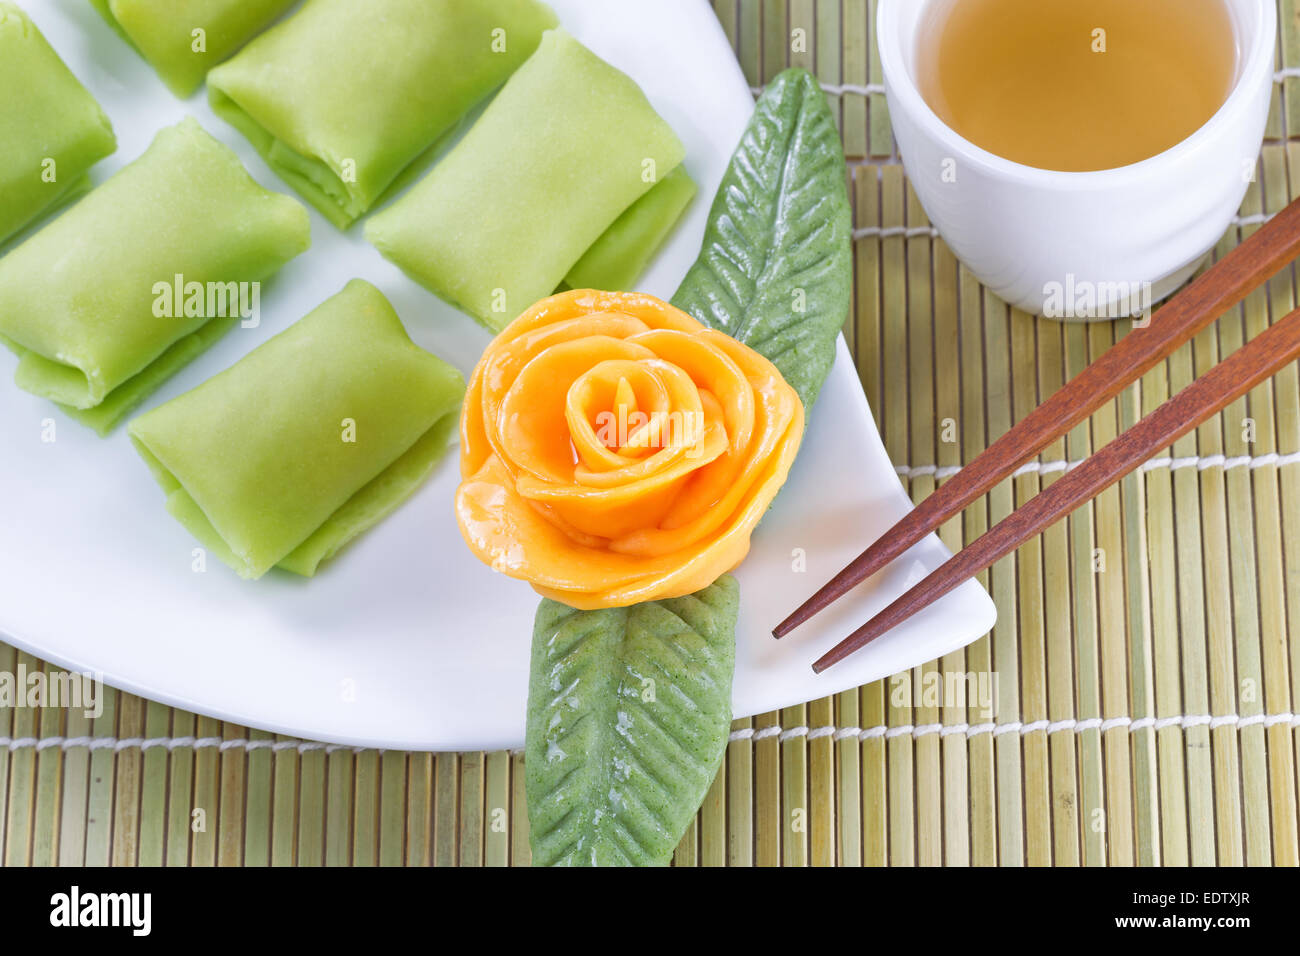 Close up top view horizontal image of Chinese Durian fruit dessert rice cakes, yellow decoration rose, and green tea Stock Photo